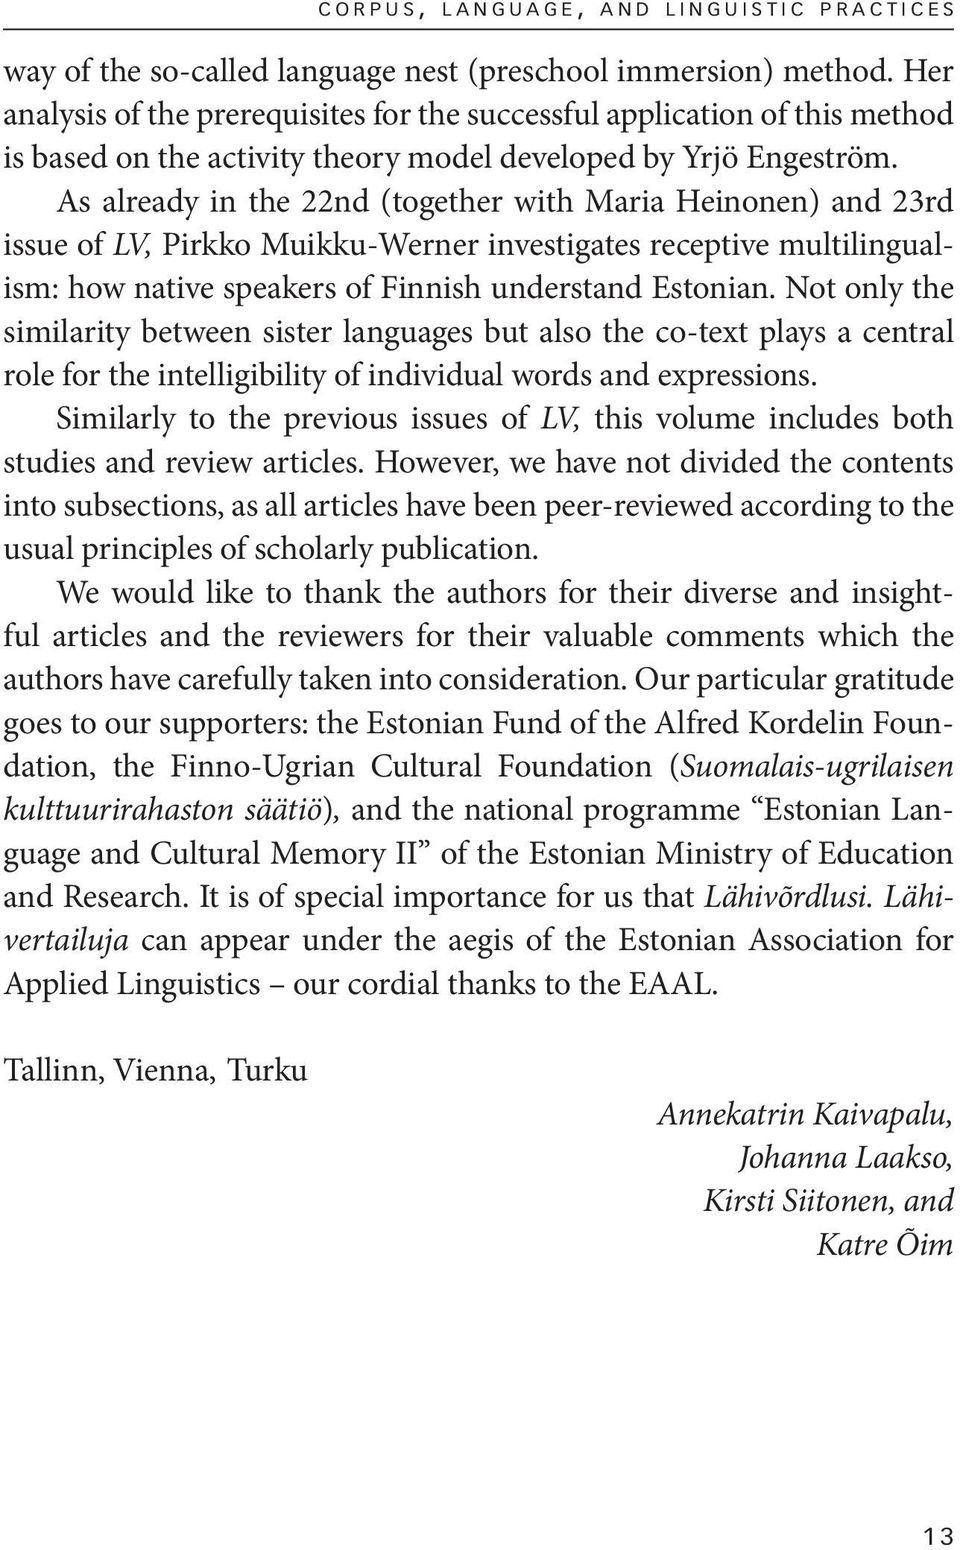 As already in the 22nd (together with Maria Heinonen) and 23rd issue of LV, Pirkko Muikku-Werner investigates receptive multilingualism: how native speakers of Finnish understand Estonian.